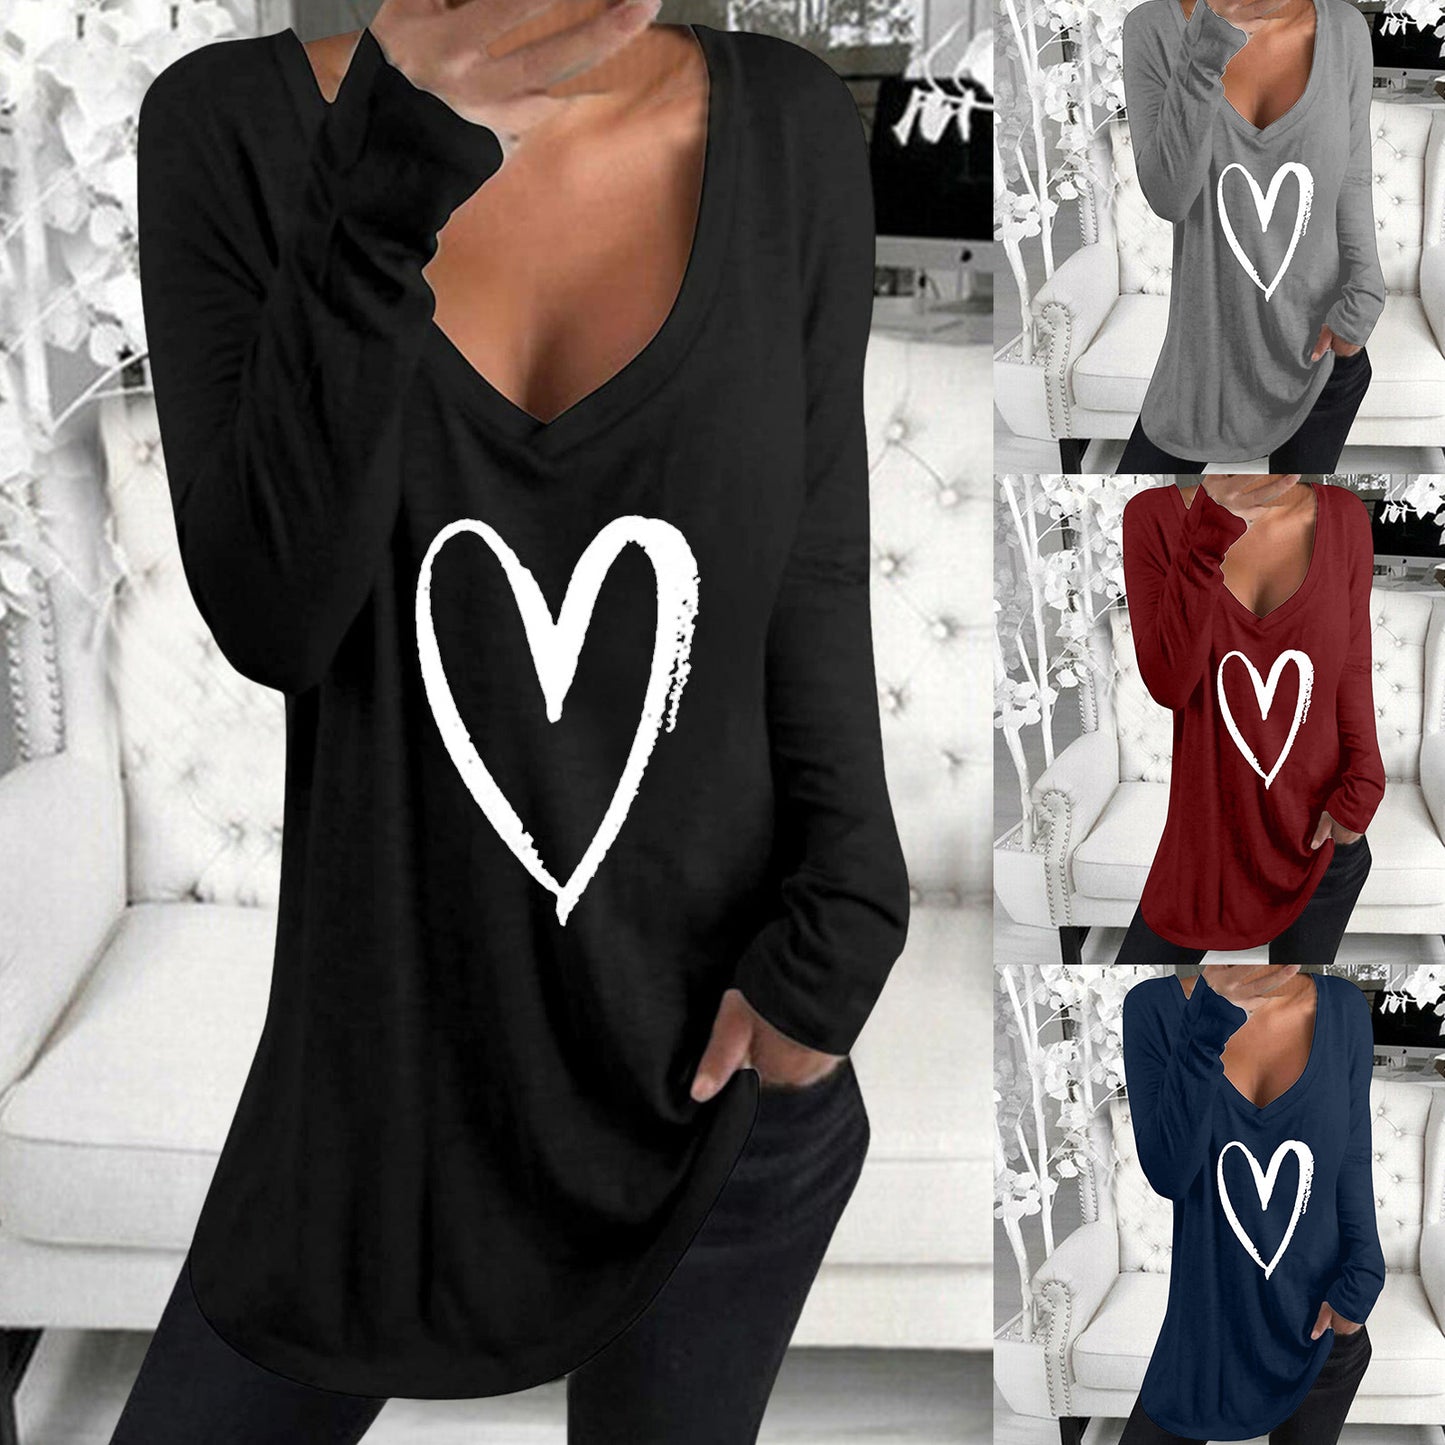 V-Neck Heart Printed Casual Top T-Shirt